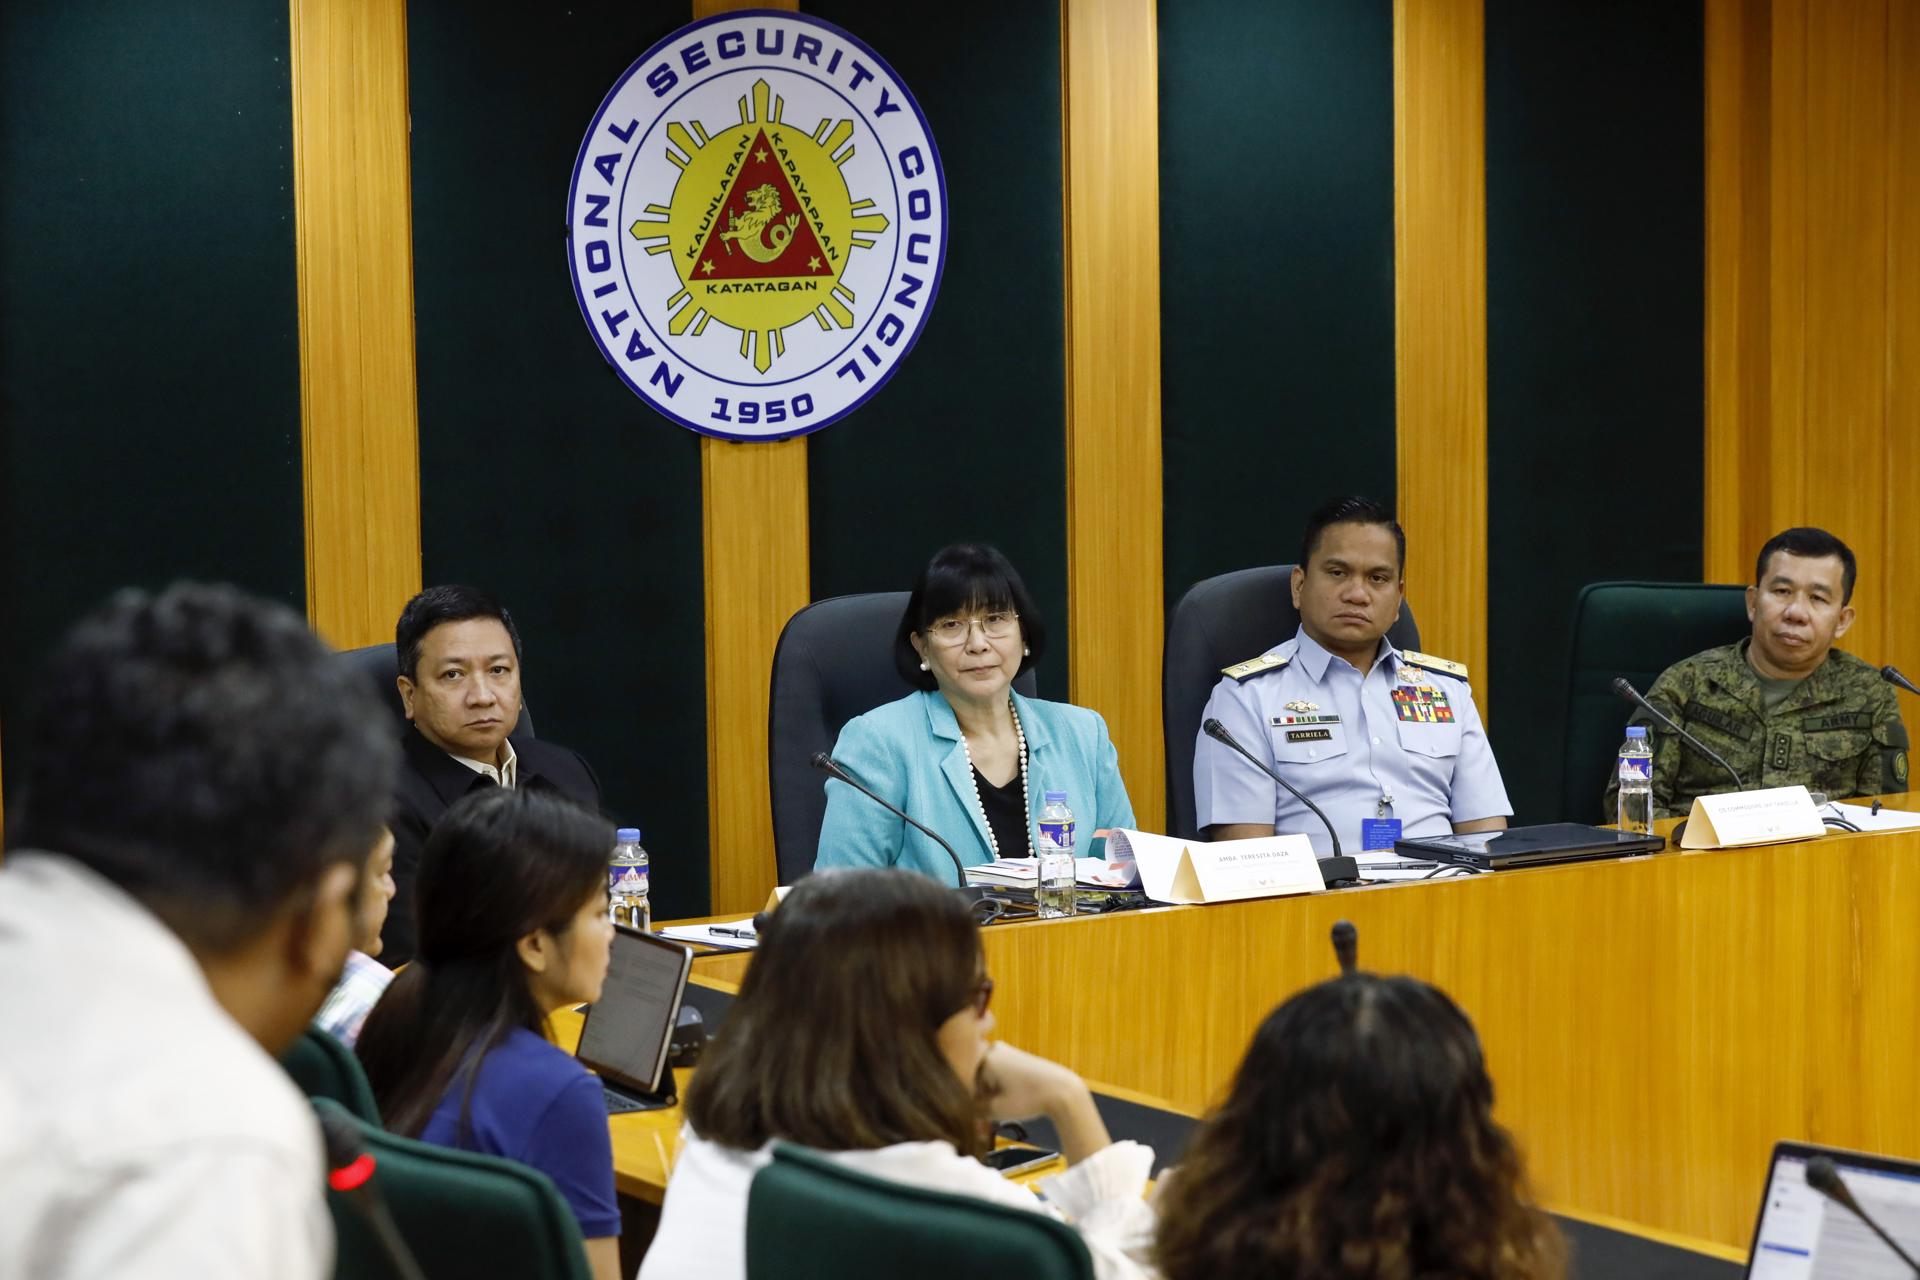 (L-R) National Security Council (NSC) Spokesperson Jonathan Malaya, Department of Foreign Affairs Assistant Secretary Teresita Daza, Philippine Coast Guard Commodore Jay Tariella and Armed Forces of the Philippines Colonel Medel Aguilar attend a press conference at the NSC office in Quezon City, Metro Manila, Philippines 23 October 2023. EFE-EPA/ROLEX DELA PENA
